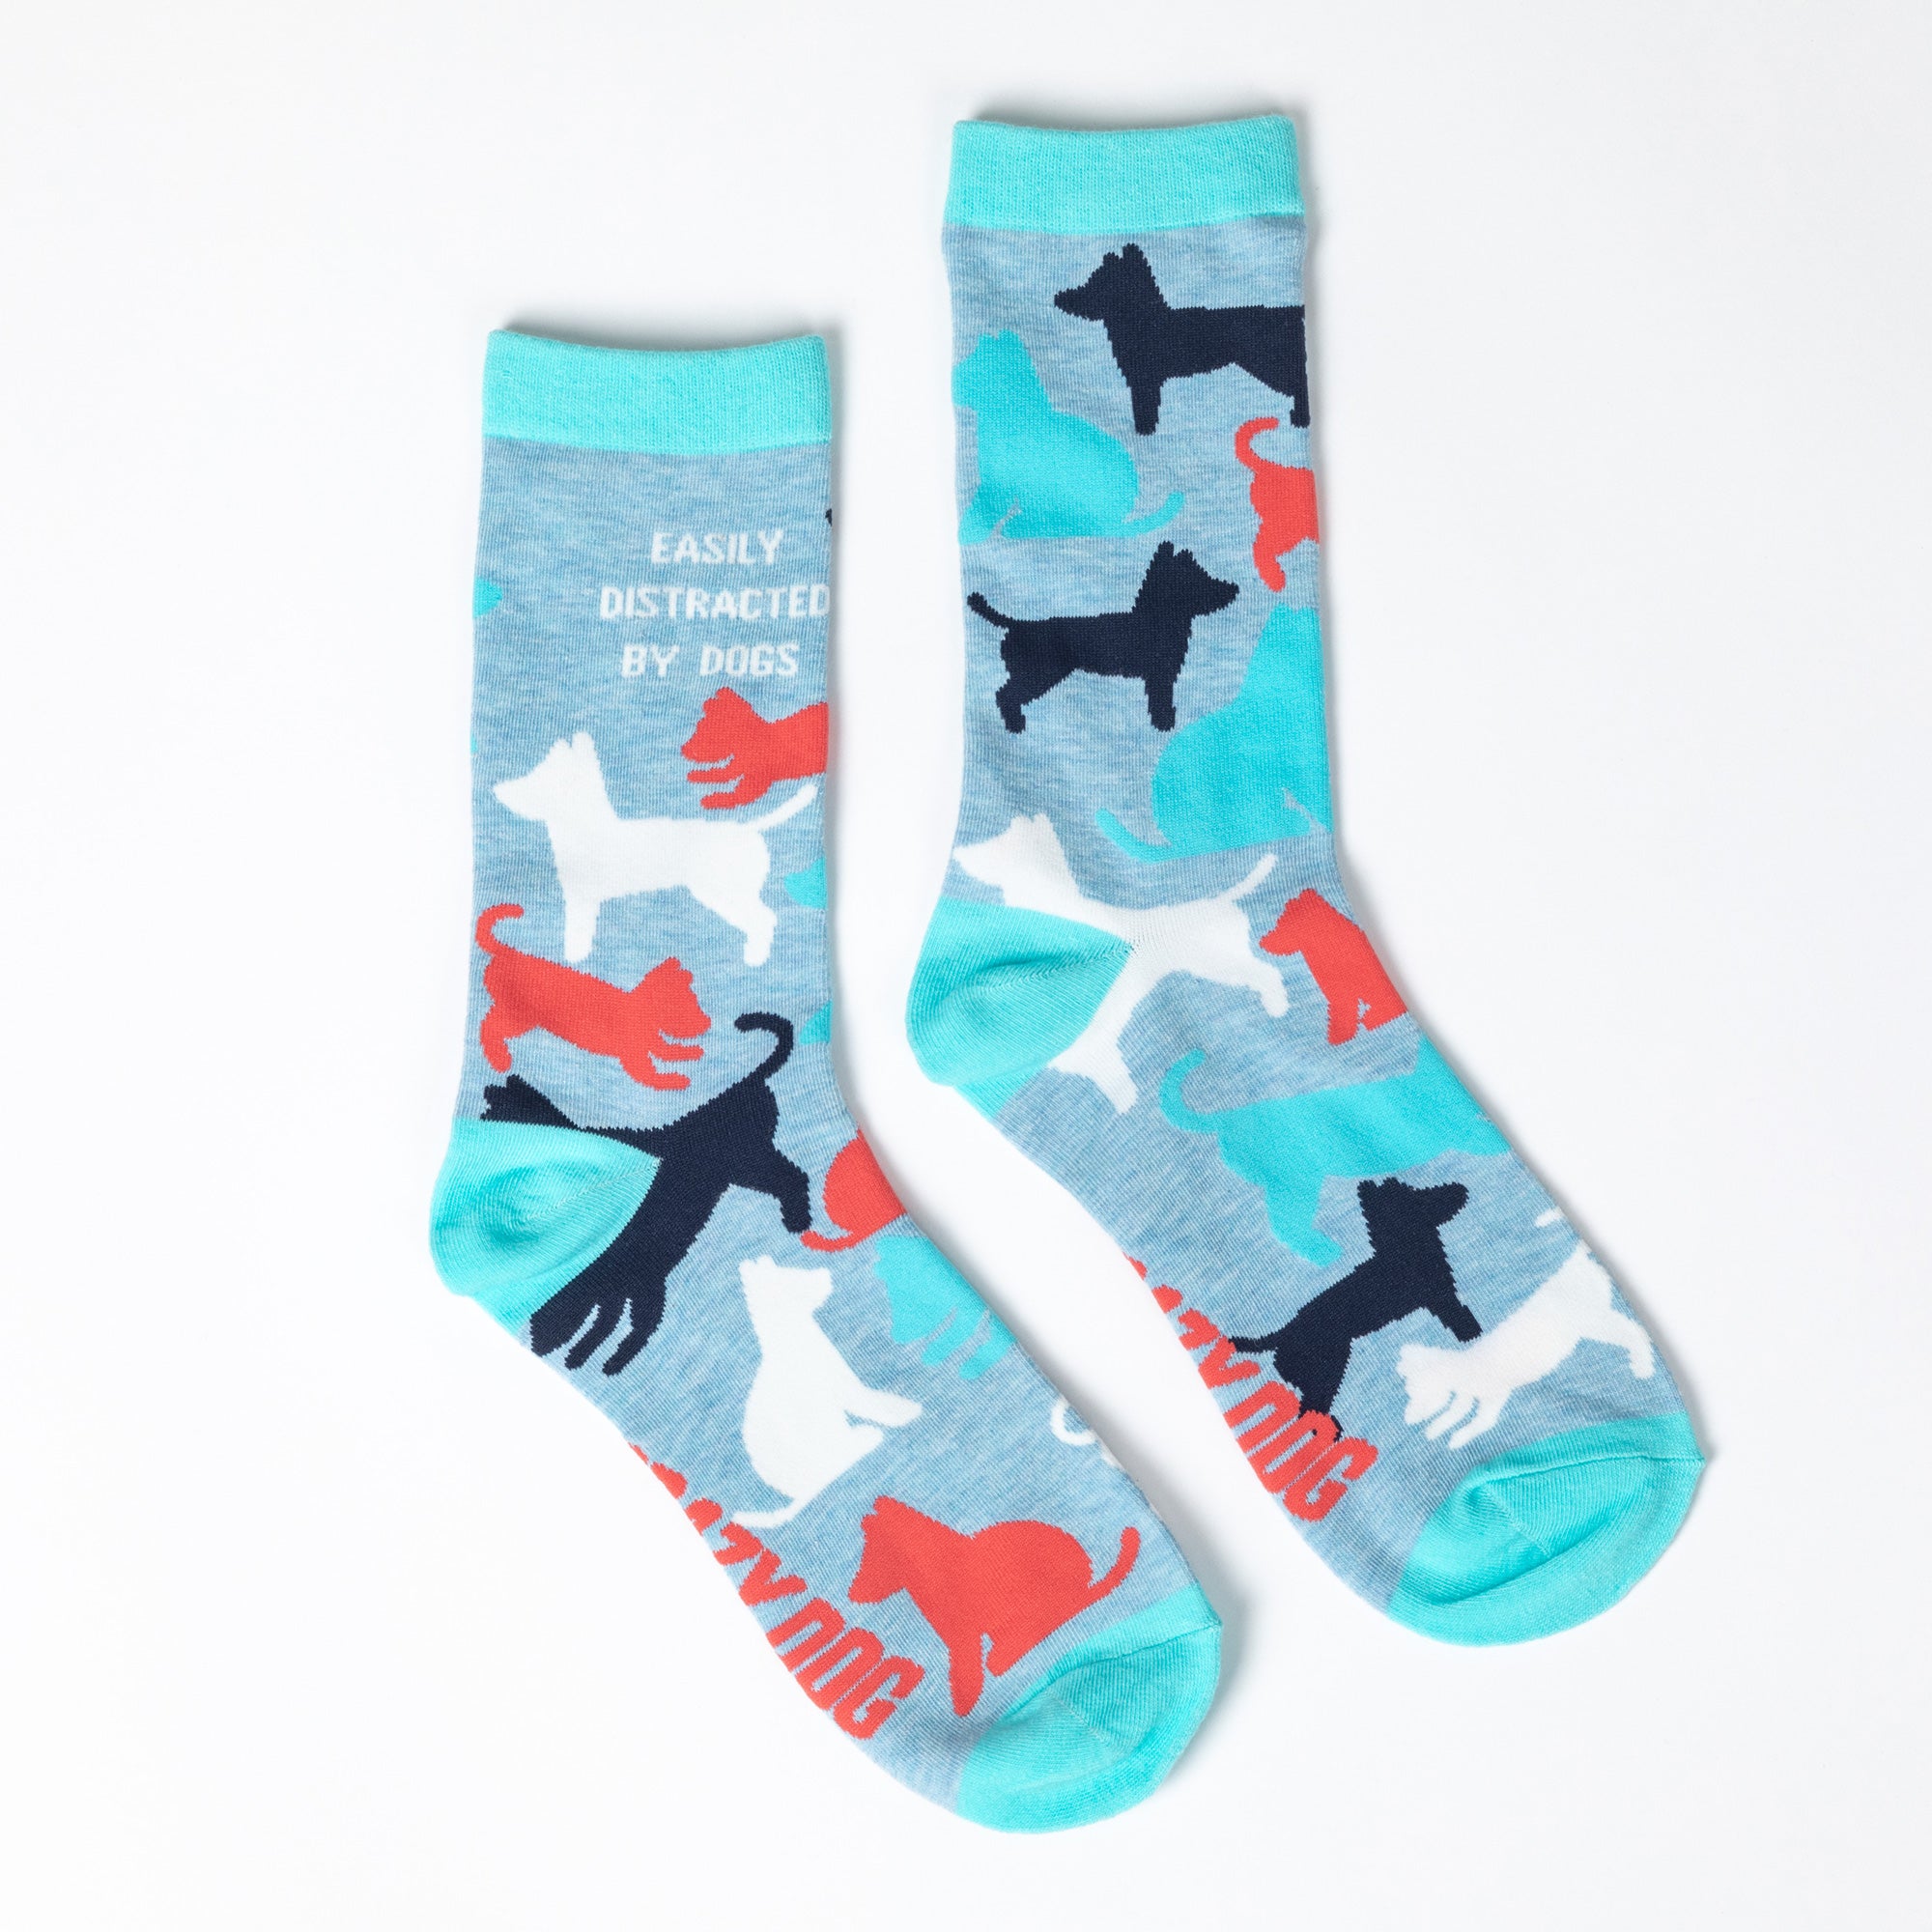 Cheeky Pet Saying Socks - Easily Distracted By Dogs